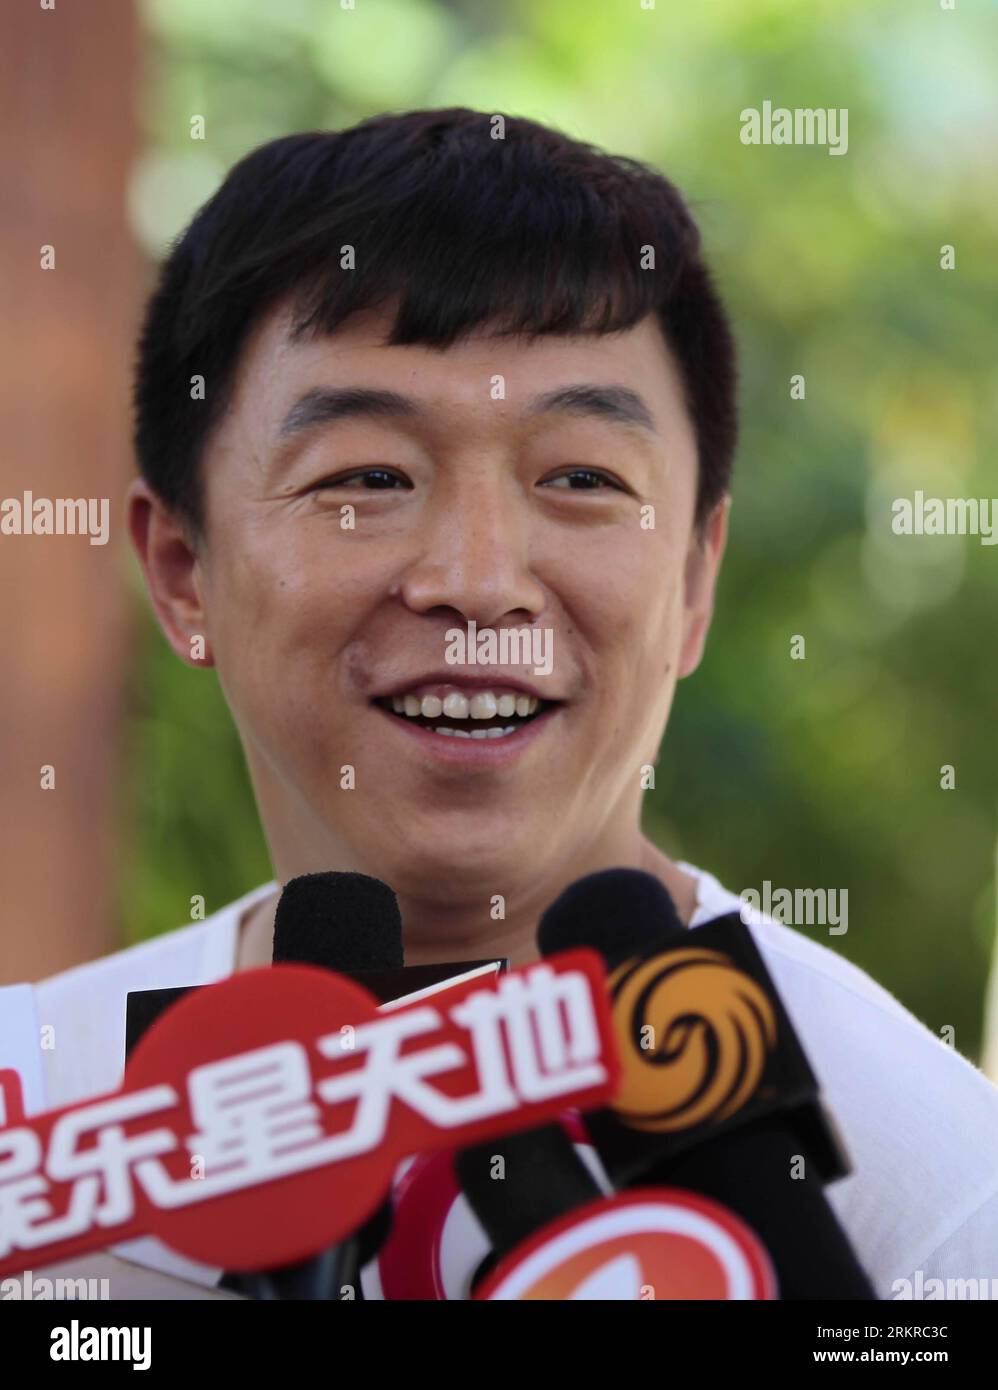 Bildnummer: 58186308  Datum: 03.07.2012  Copyright: imago/Xinhua (120704) -- LINGSHUI, July 4, 2012 (Xinhua) -- Actor Huang Bo attends the press conference of movie 101 Proposals in Lingshui, south China s Hainan Province, July 3, 2012. The Chinese movie 101 Proposals adapted from a Japanese TV series will debut on the Valentine s Day of 2013. (Xinhua/Chen Wenwu) (zgp) CHINA-HAINAN-MOVIE 101 PROPOSALS-PRESS CONFERENCE (CN) PUBLICATIONxNOTxINxCHN People Entertainment Porträt xjh x0x 2012 hoch      58186308 Date 03 07 2012 Copyright Imago XINHUA  Ling Shui July 4 2012 XINHUA Actor Huang Bo Atten Stock Photo